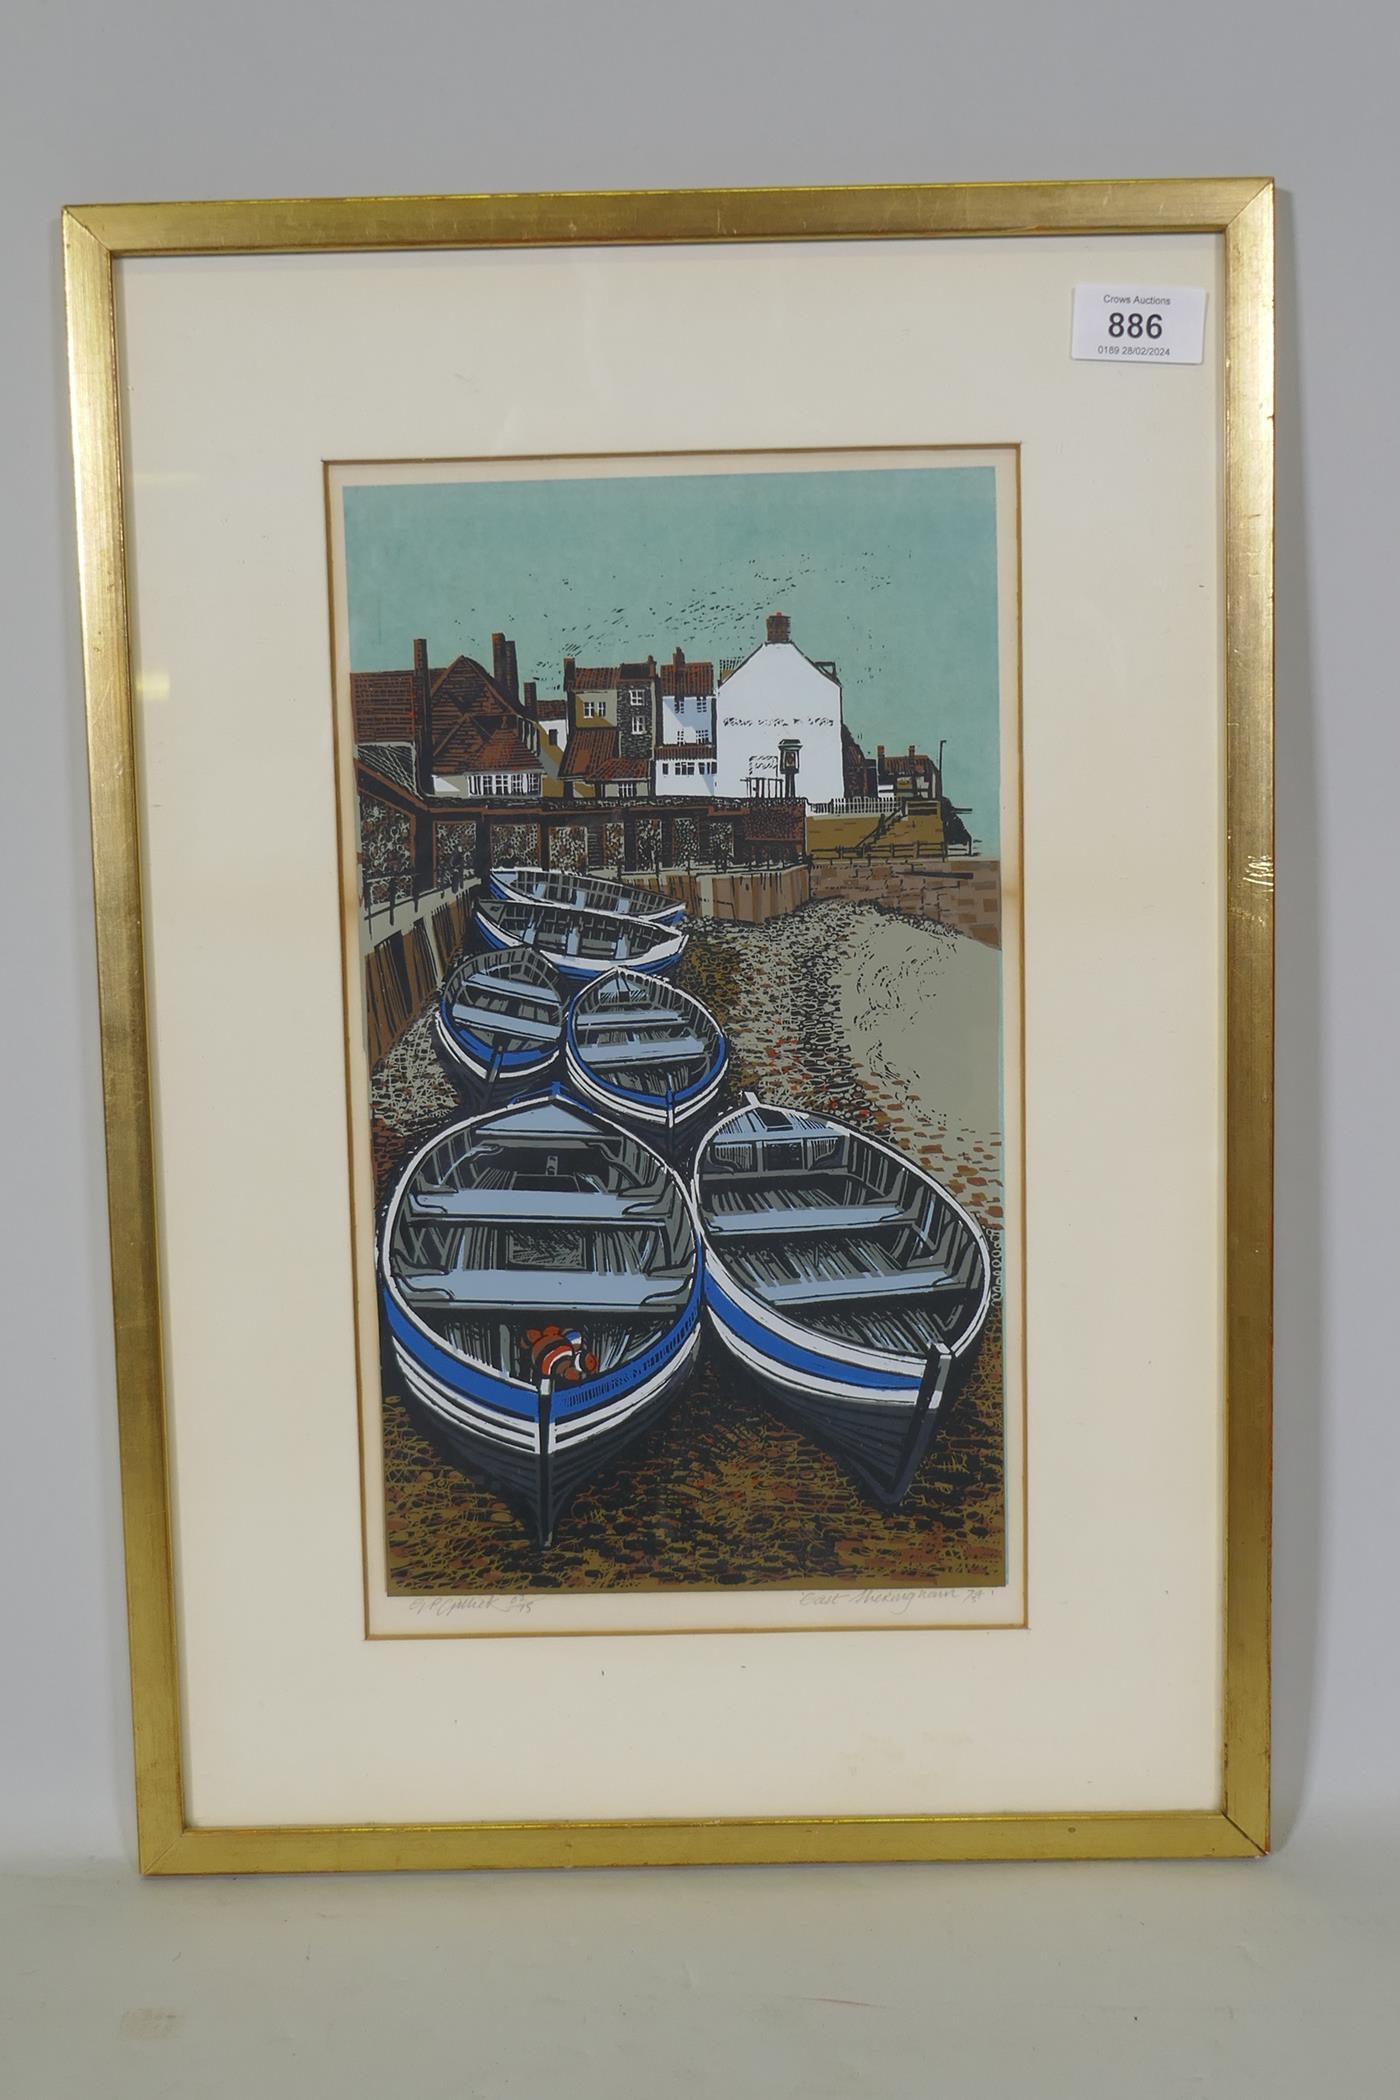 G.P. Gillick, East Sheringham, boats on the foreshore, signed limited edition screenprint, 2/75, - Image 3 of 3